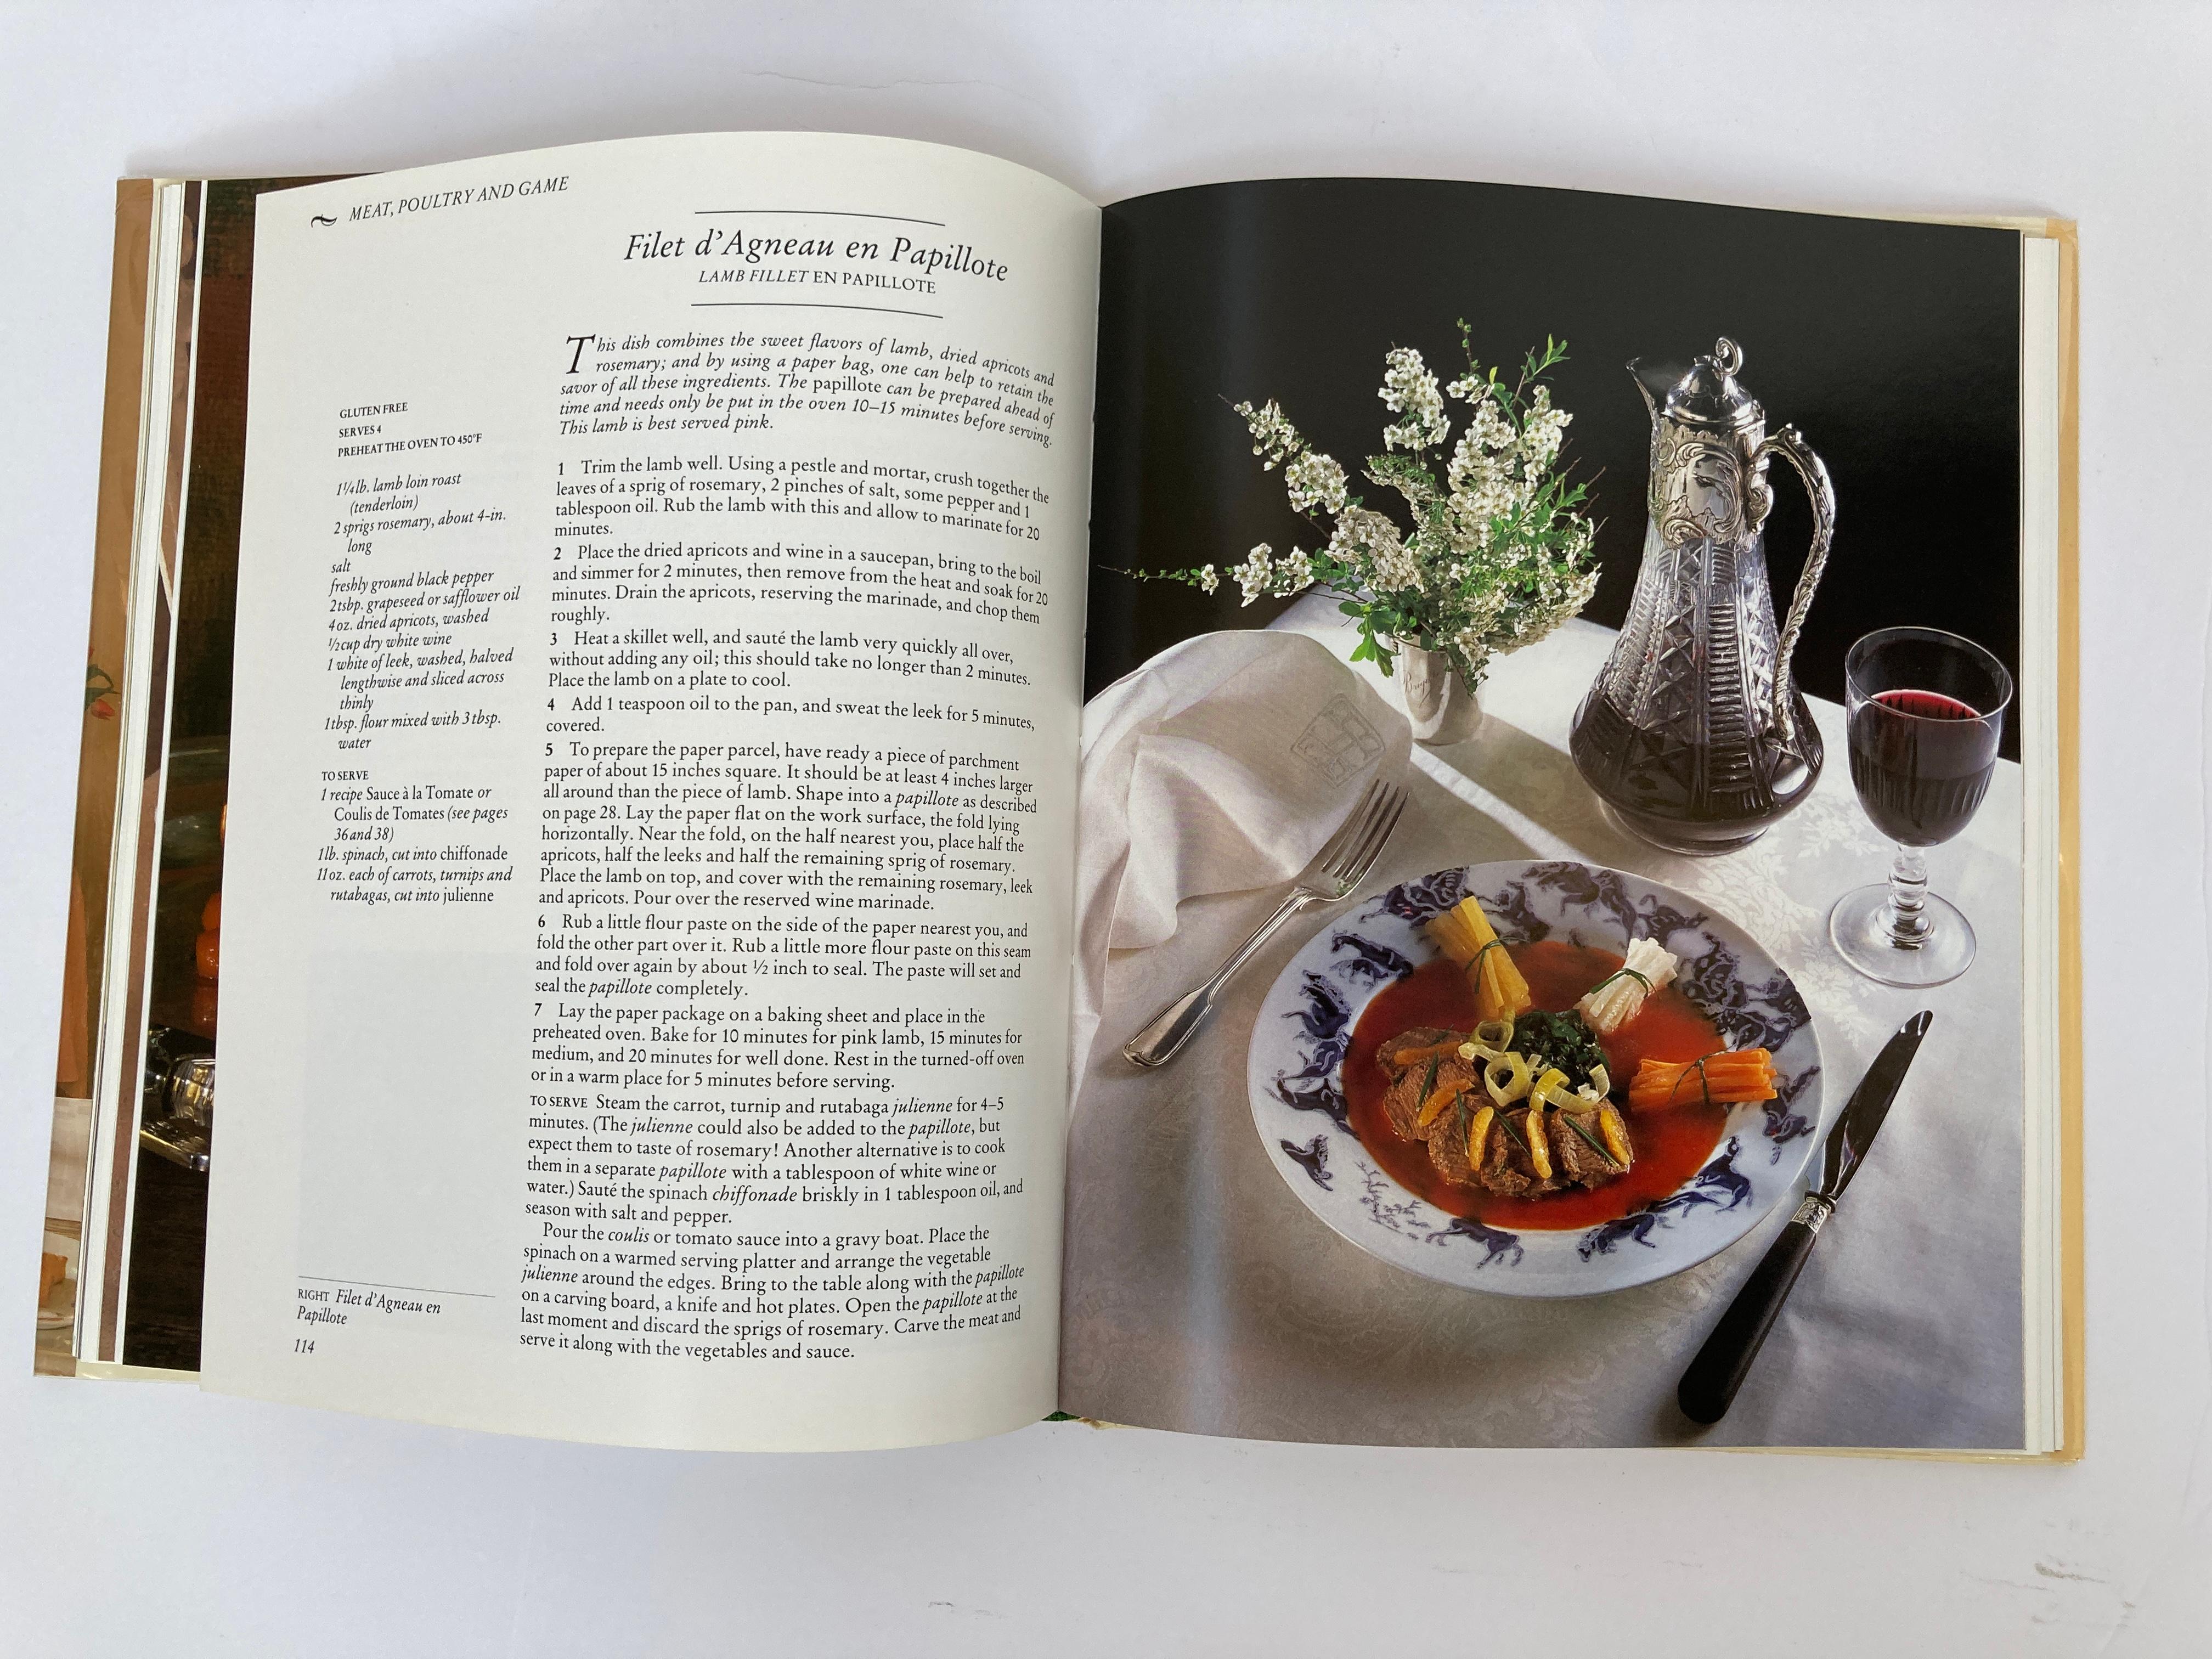 Cuisine Sante by Christopher Buey French Cuisine Book For Sale at ...